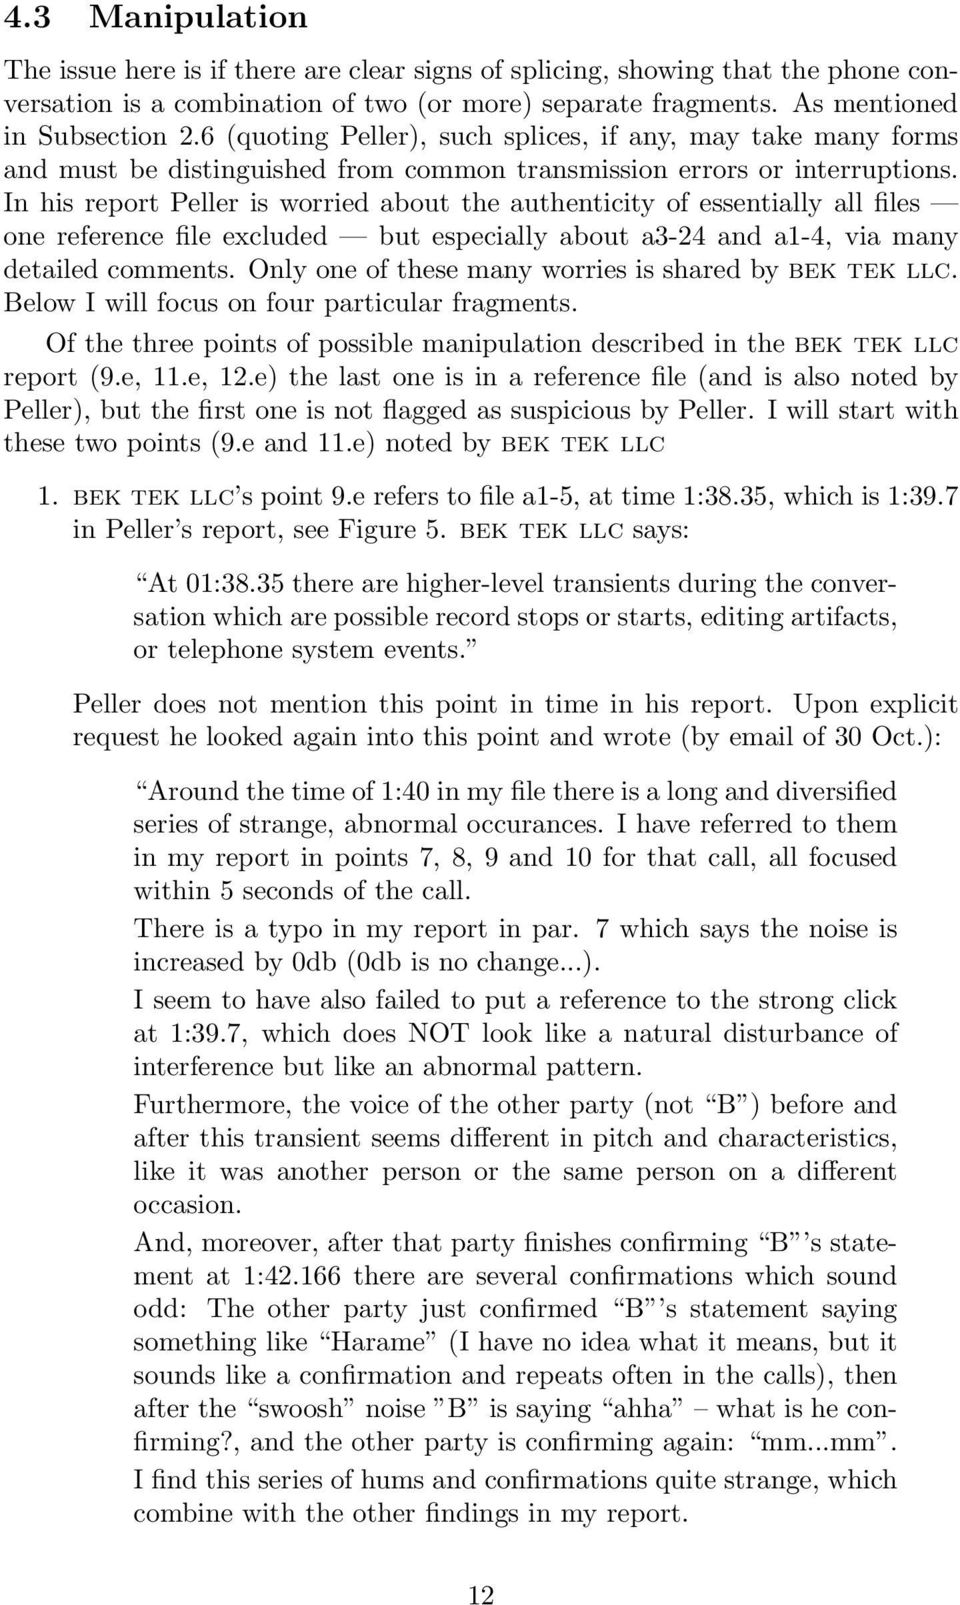 In his report Peller is worried about the authenticity of essentially all files one reference file excluded but especially about a3-24 and a1-4, via many detailed comments.